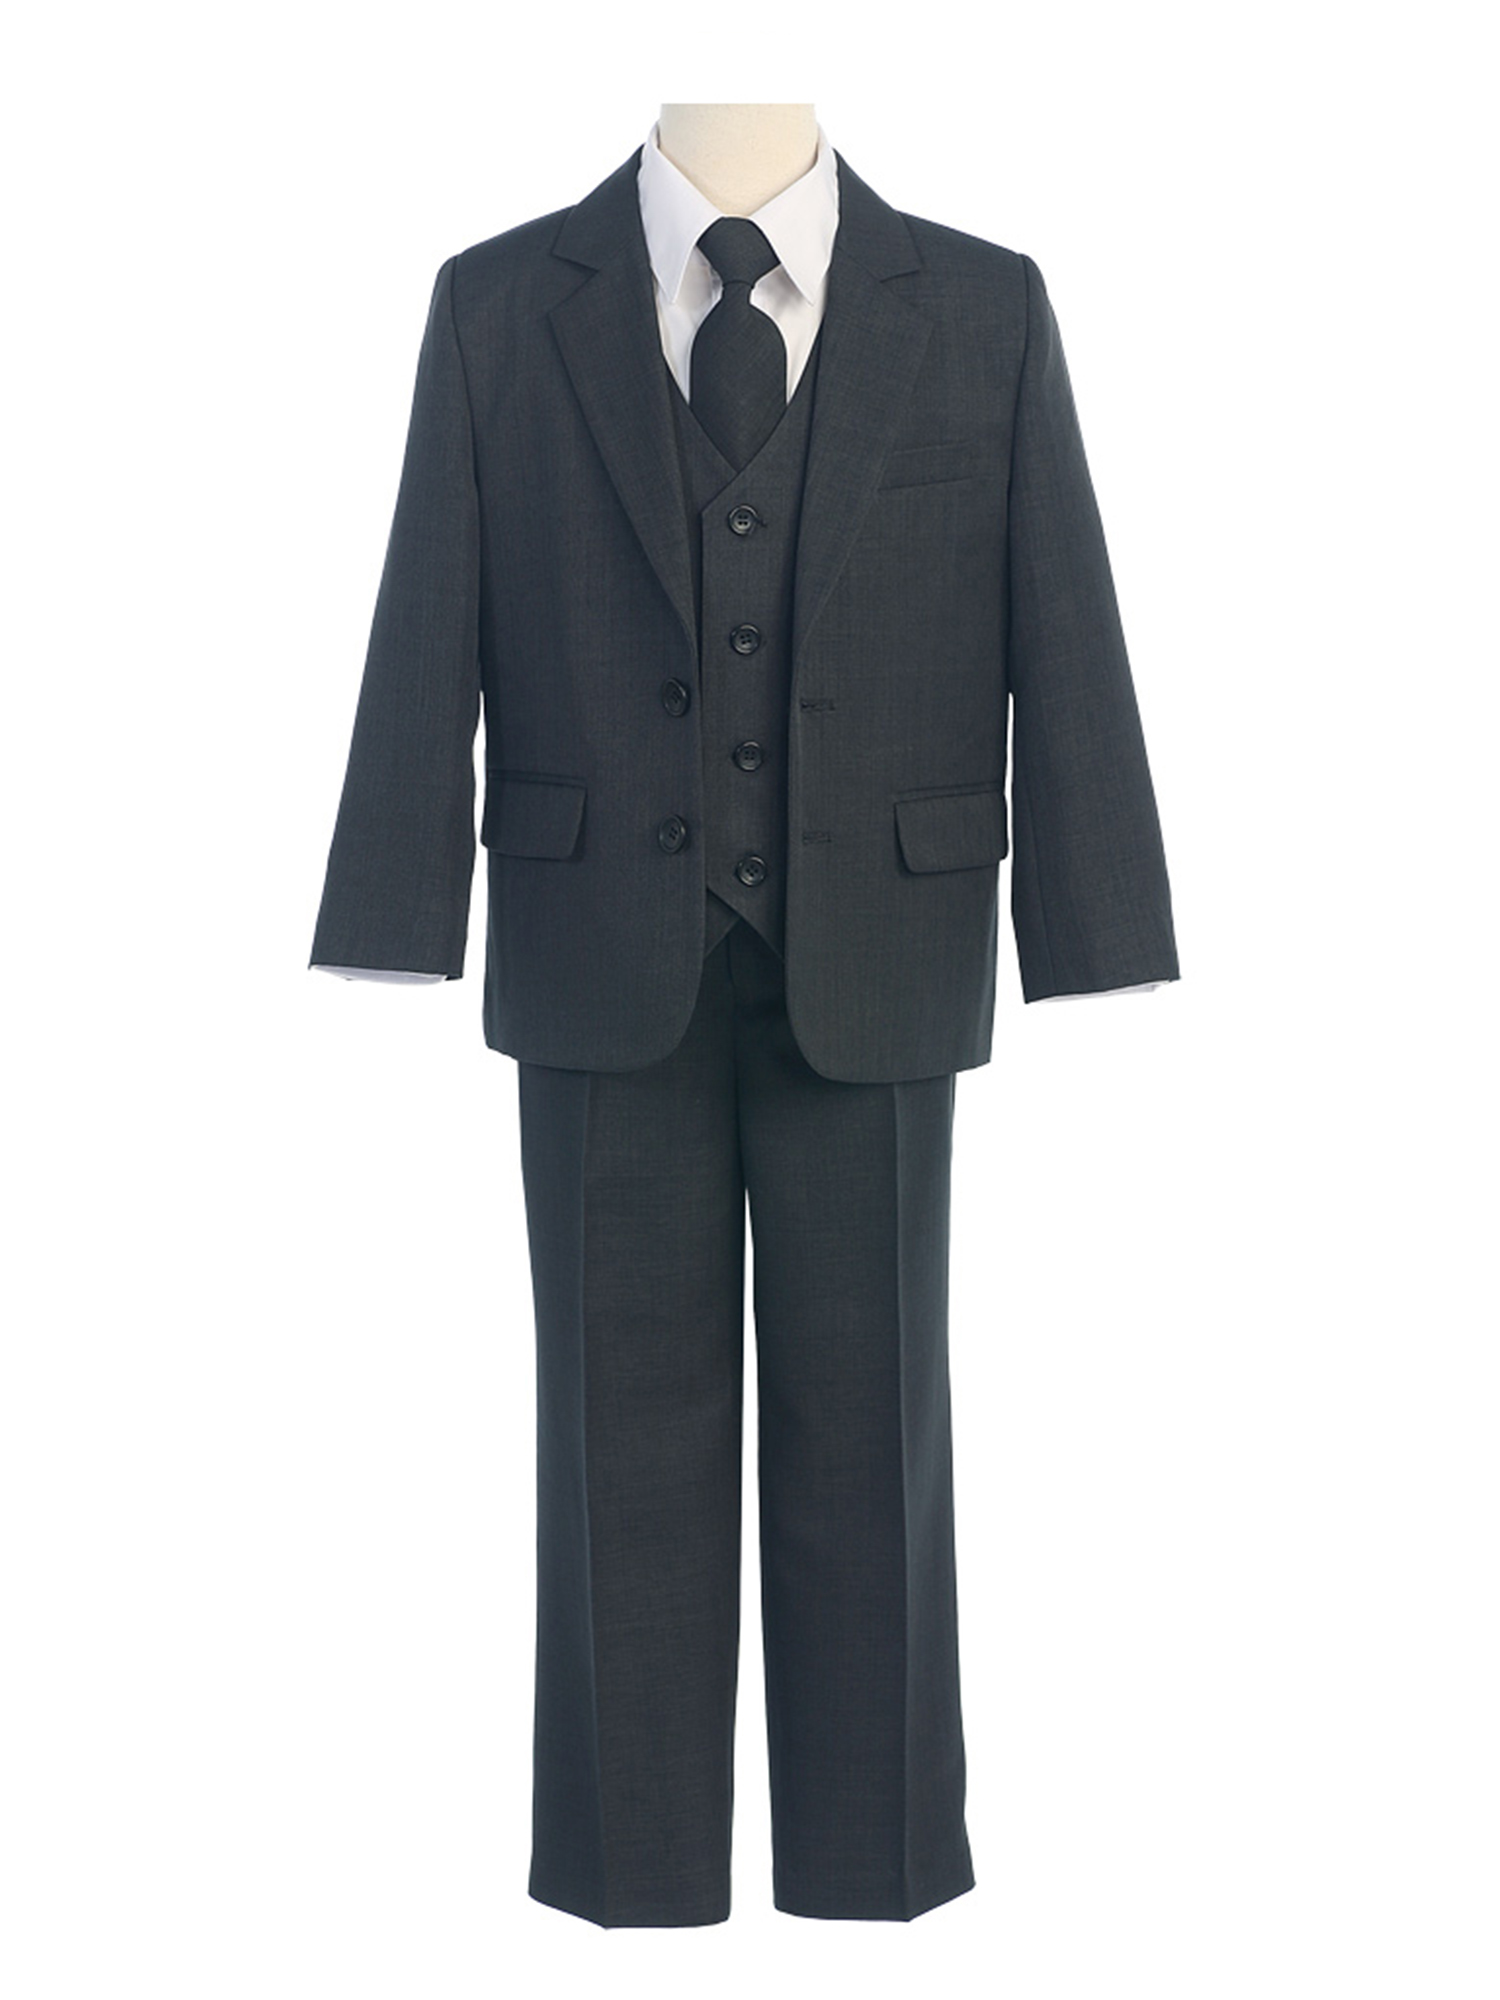 COLE Boys Suit with Shirt and Vest (5-Piece) - (18 Husky, Charcoal Grey)